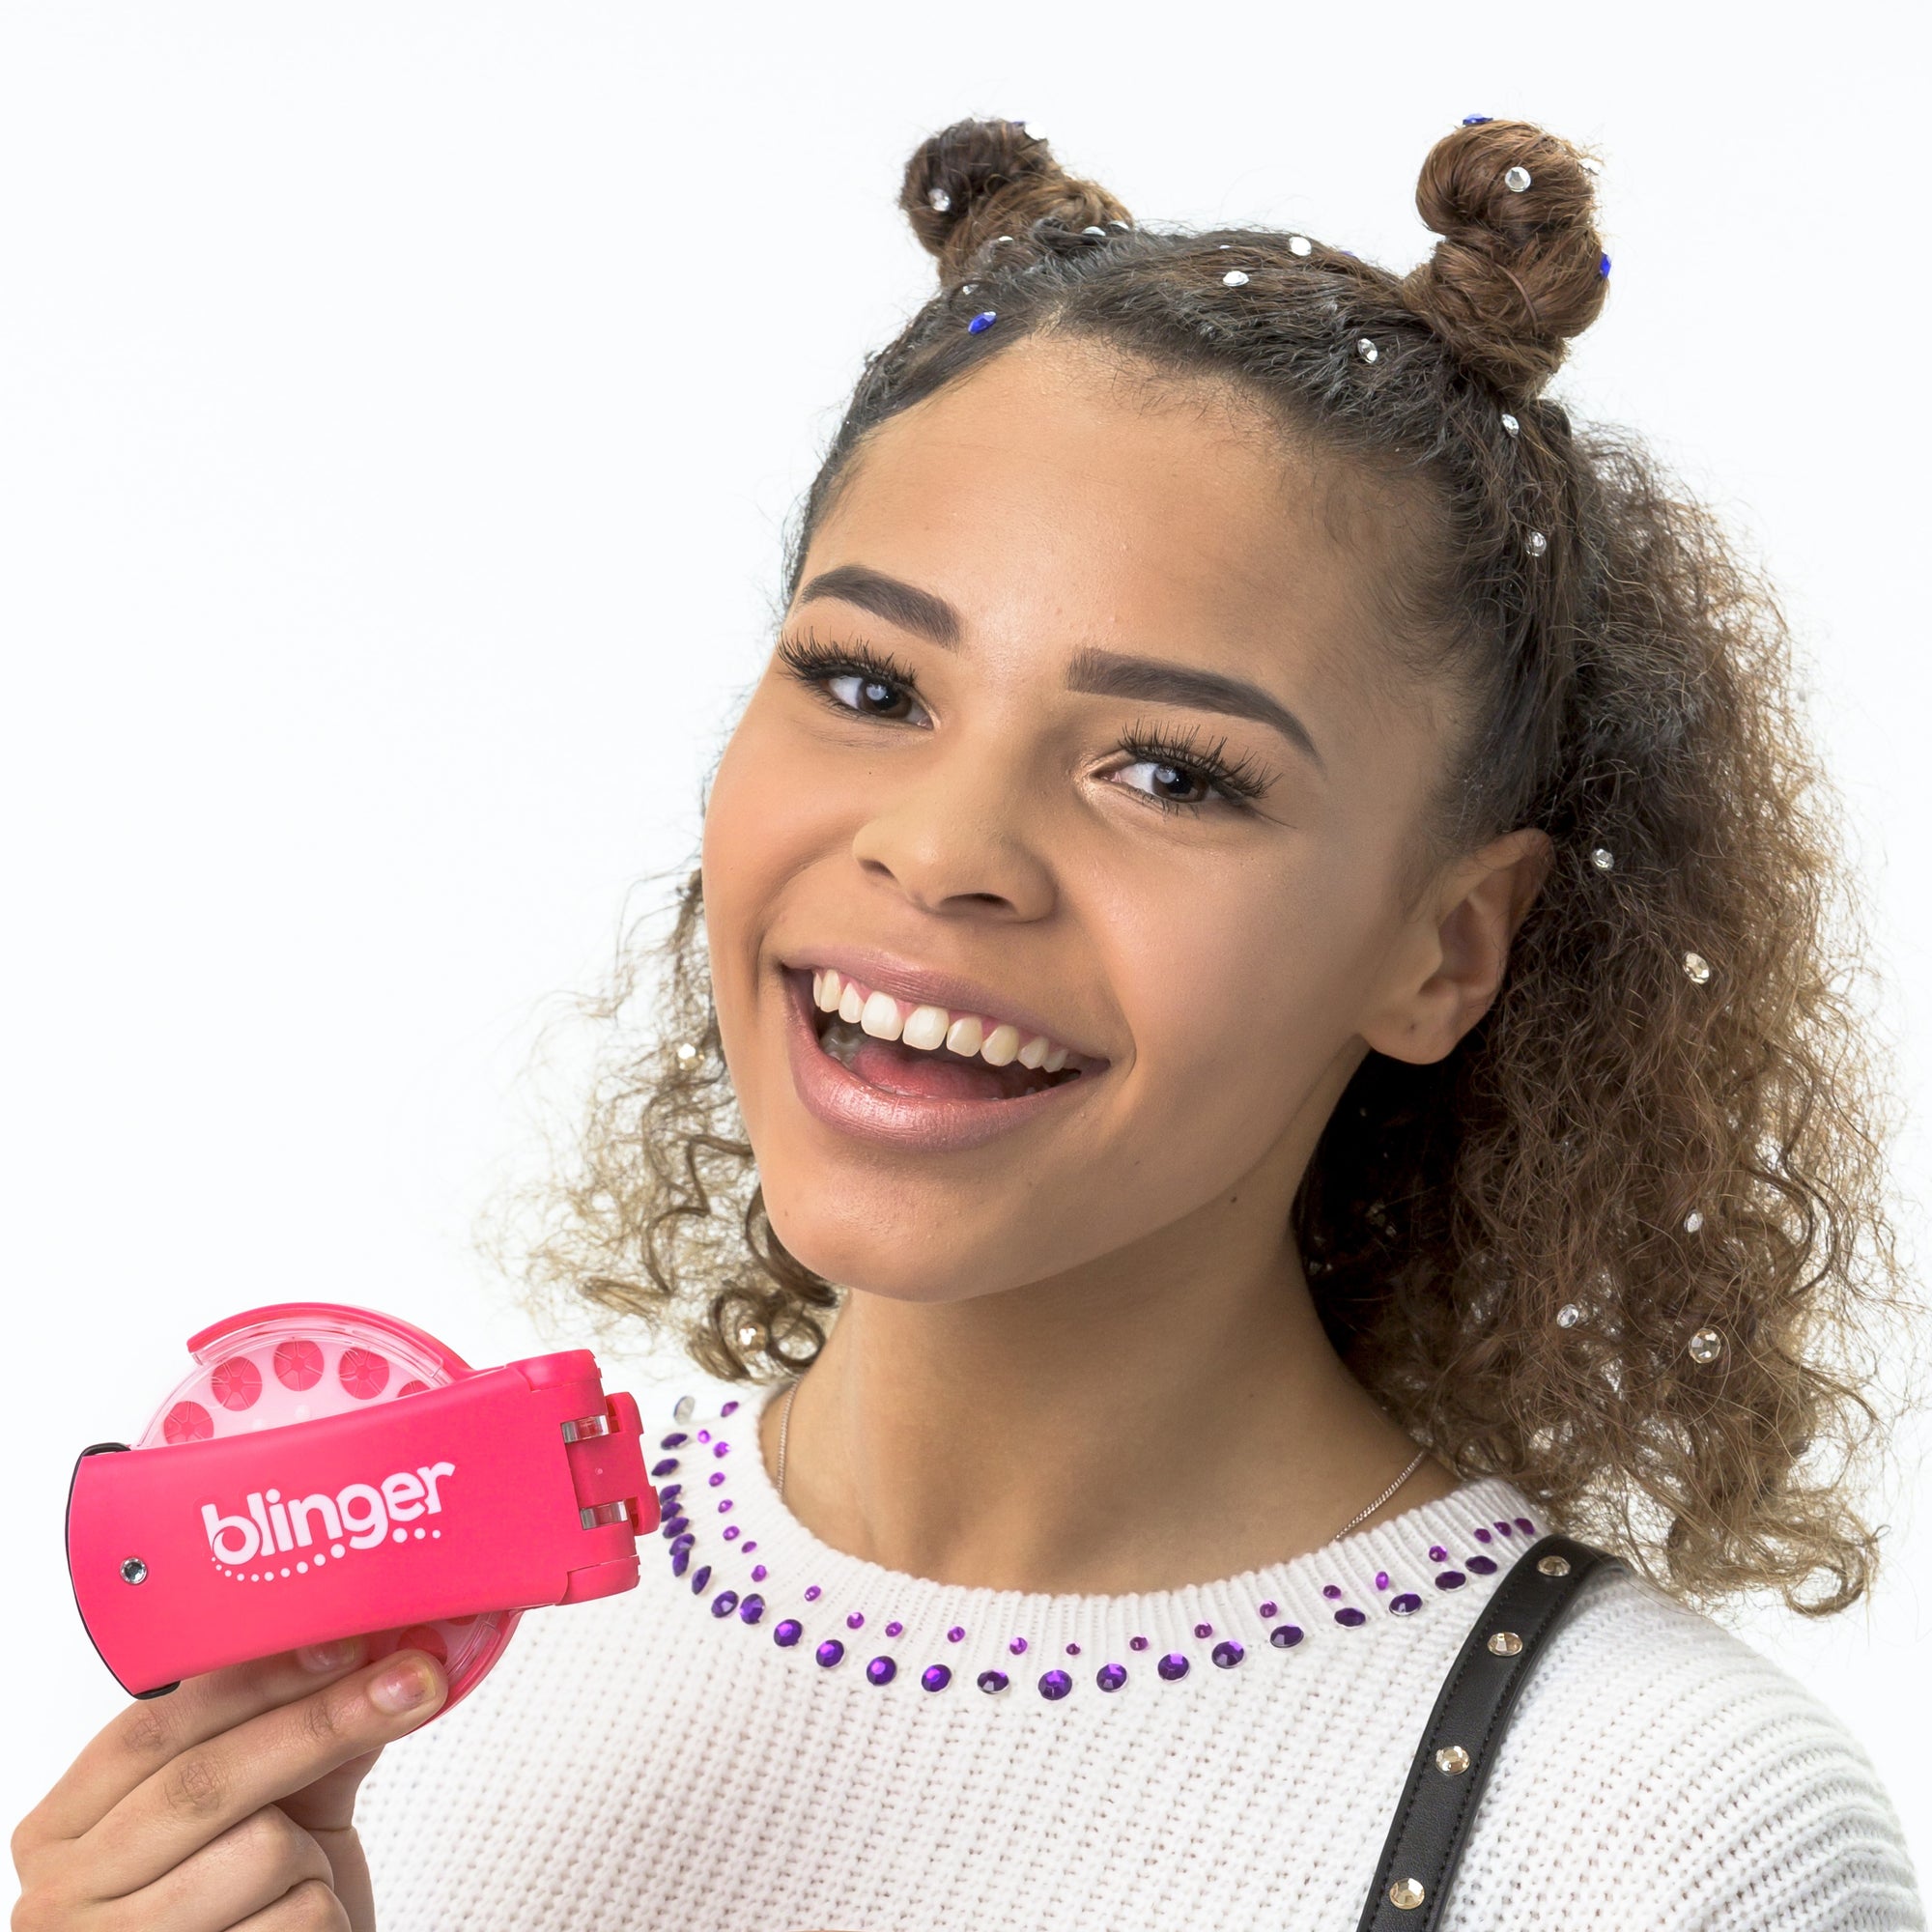 blinger® kids Glam Collection Starter Kit with Styling Tool + 225 Colorful Gems